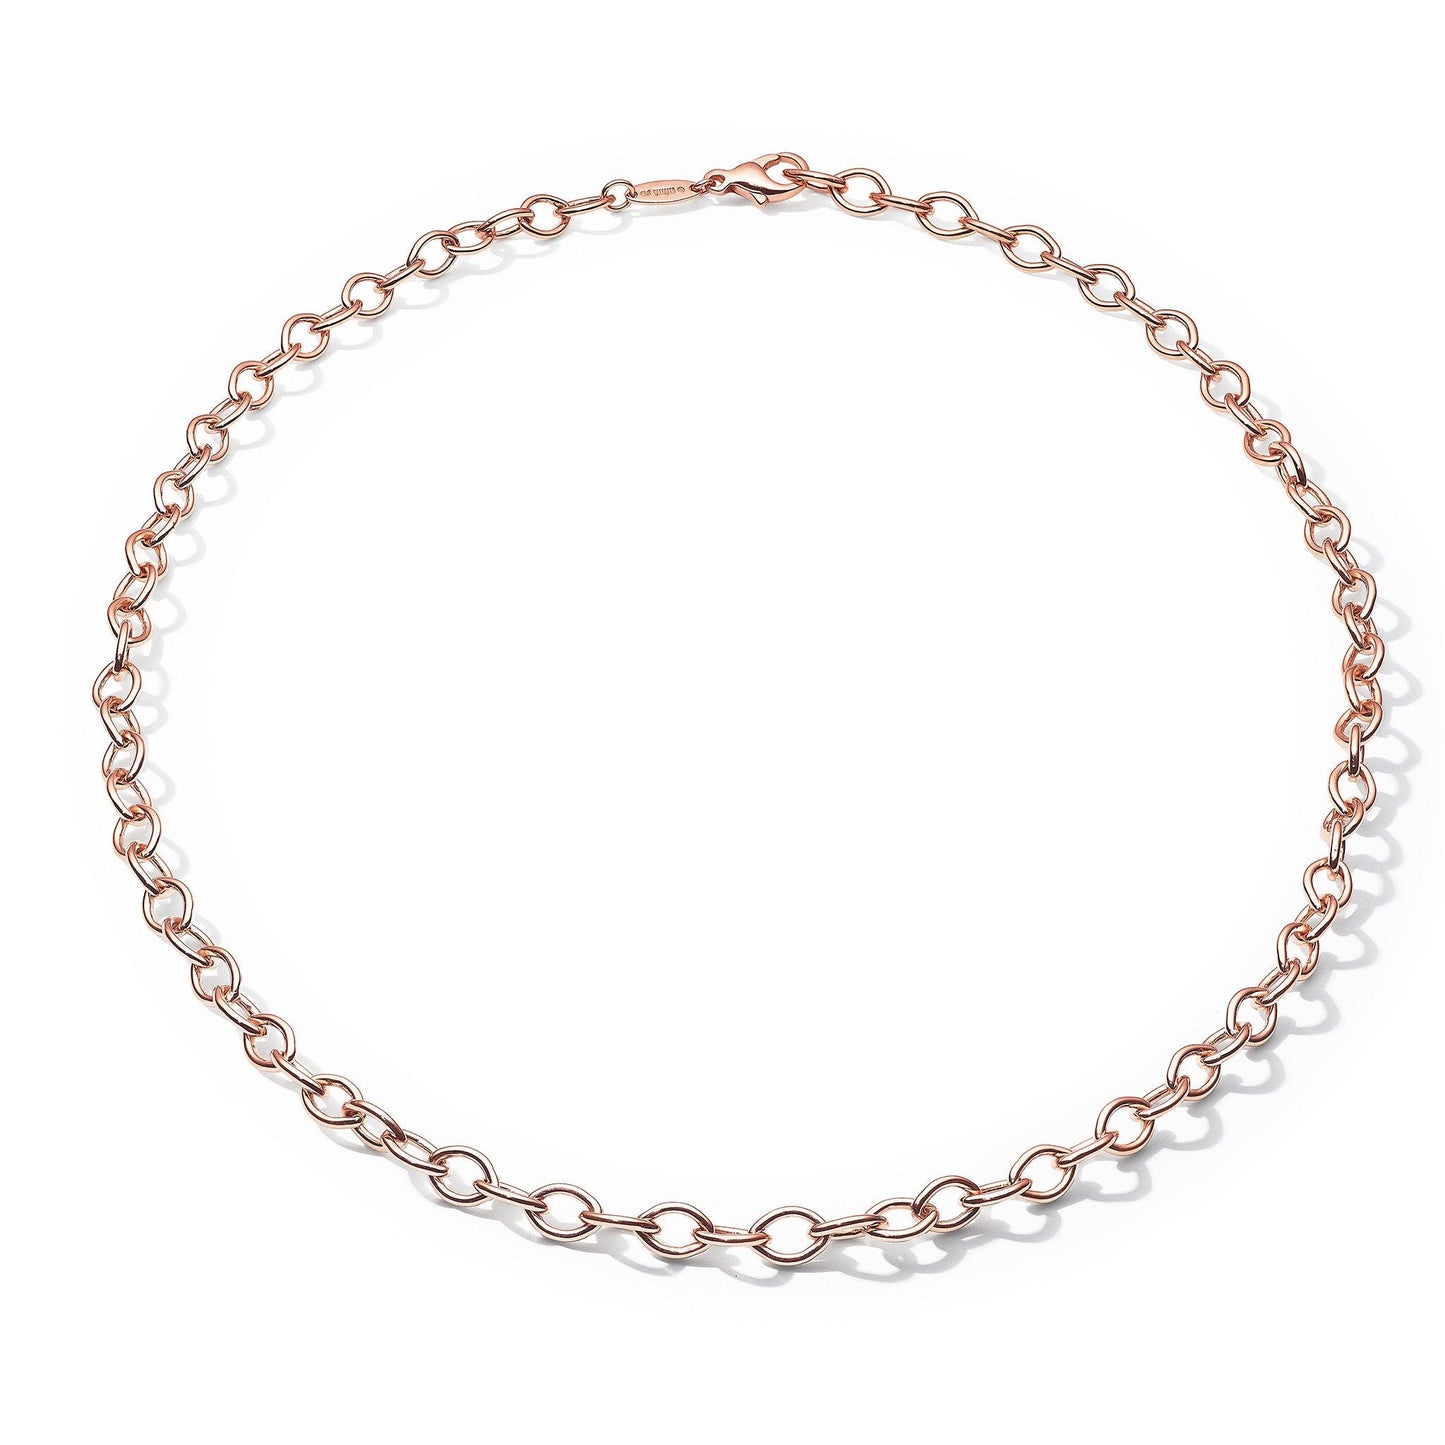 Mimi So Classic Cable Chain Necklace – 6mm_18k Rose Gold